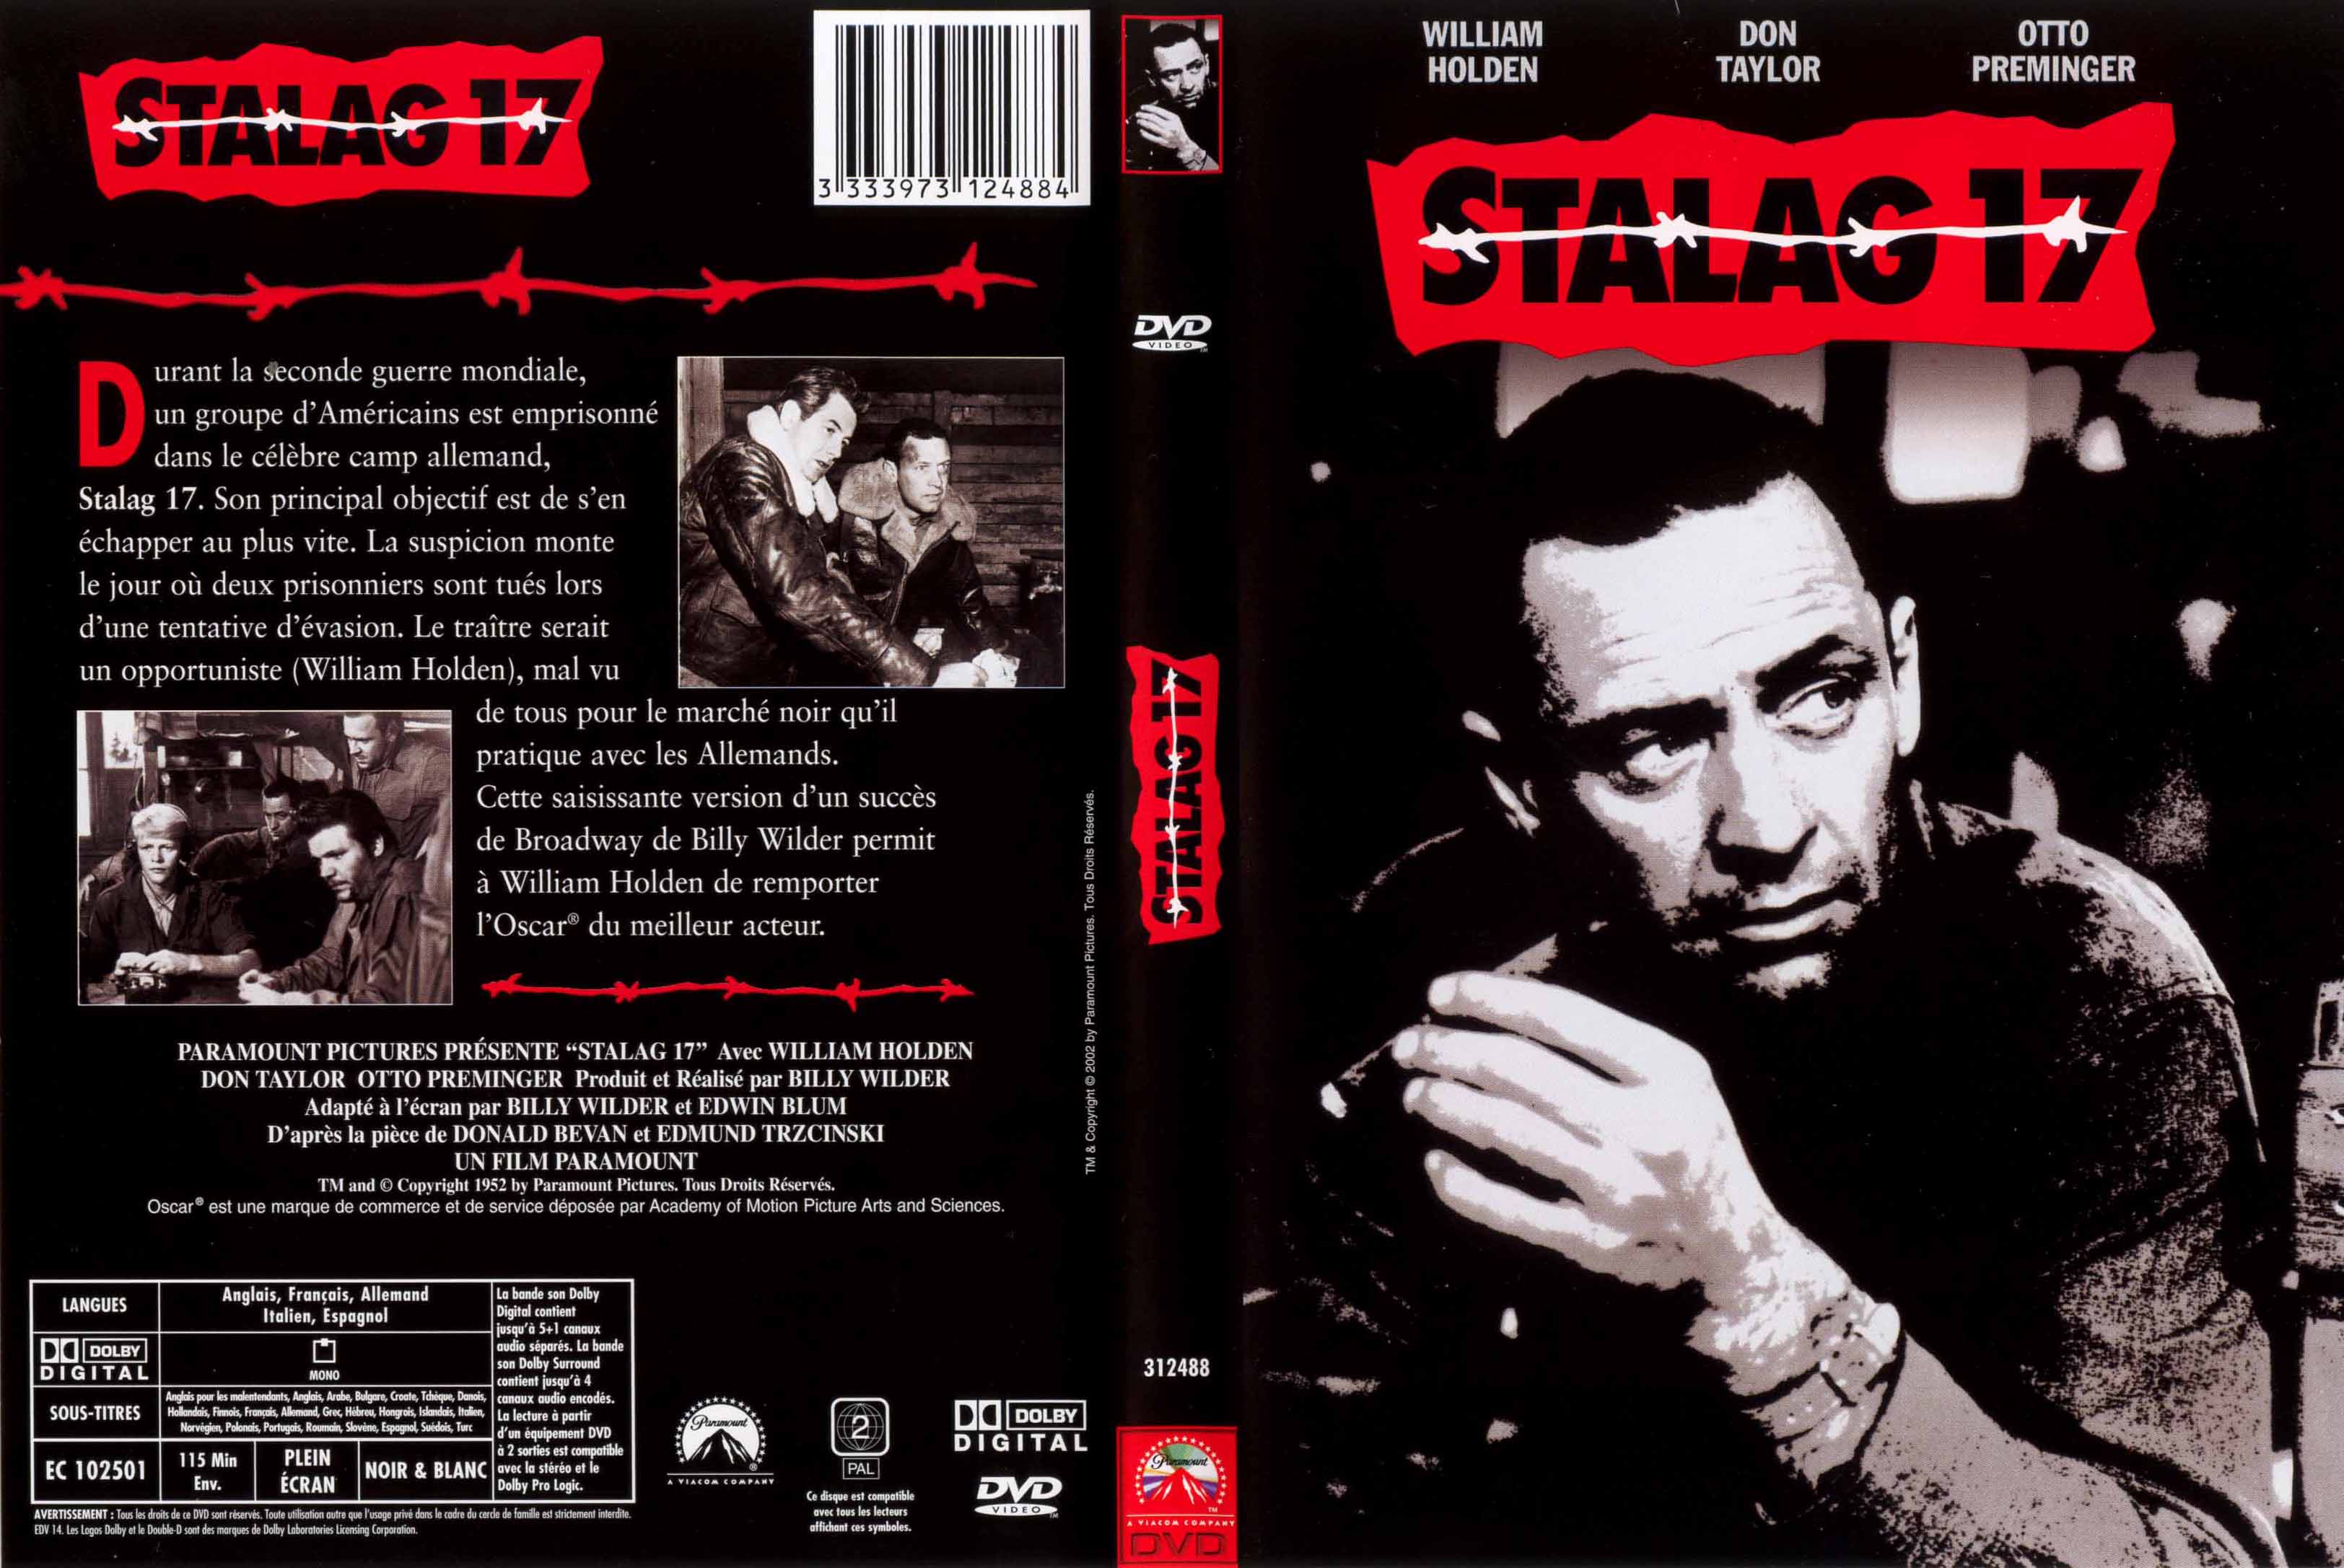 Jaquette DVD Stalag 17